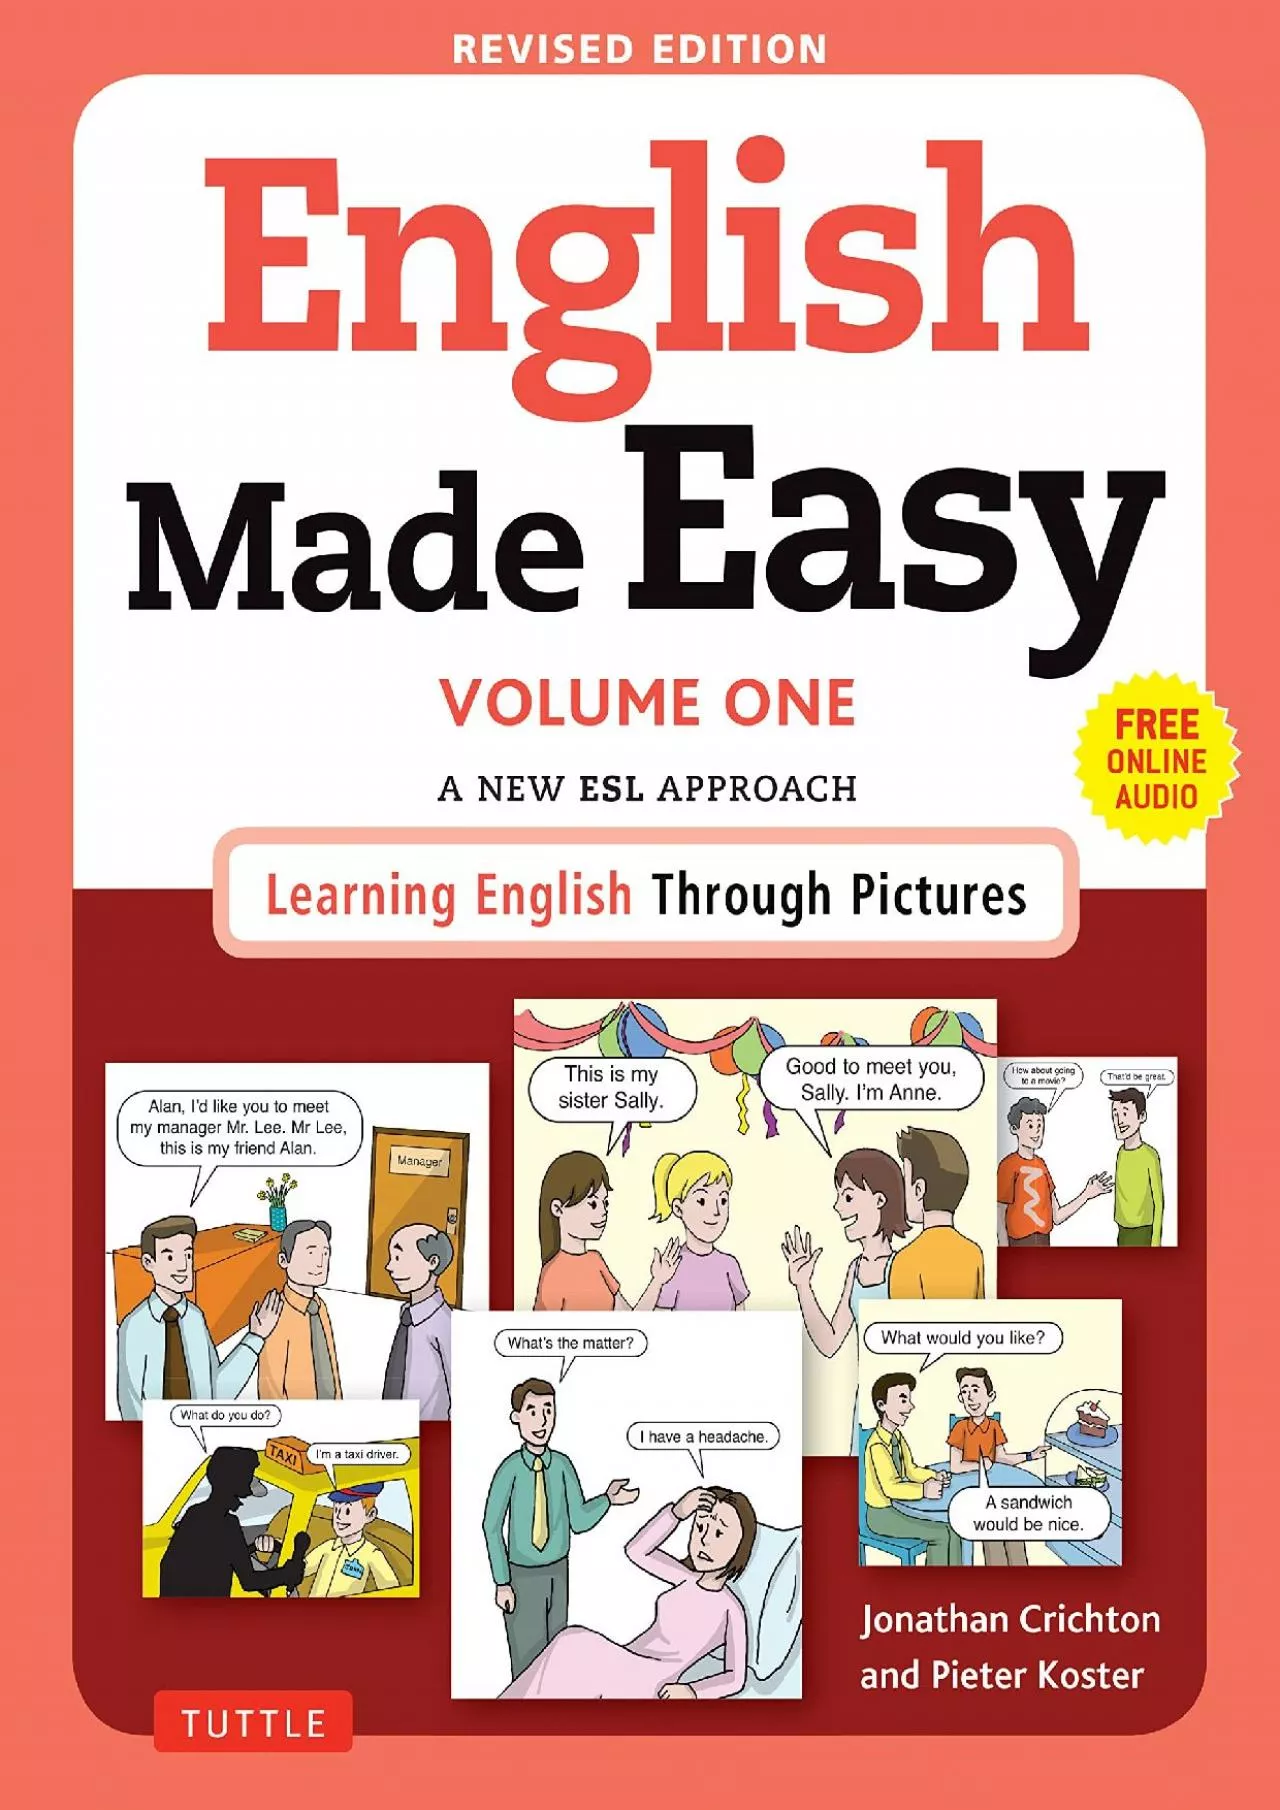 [DOWNLOAD] English Made Easy Volume One: A New ESL Approach: Learning English Through